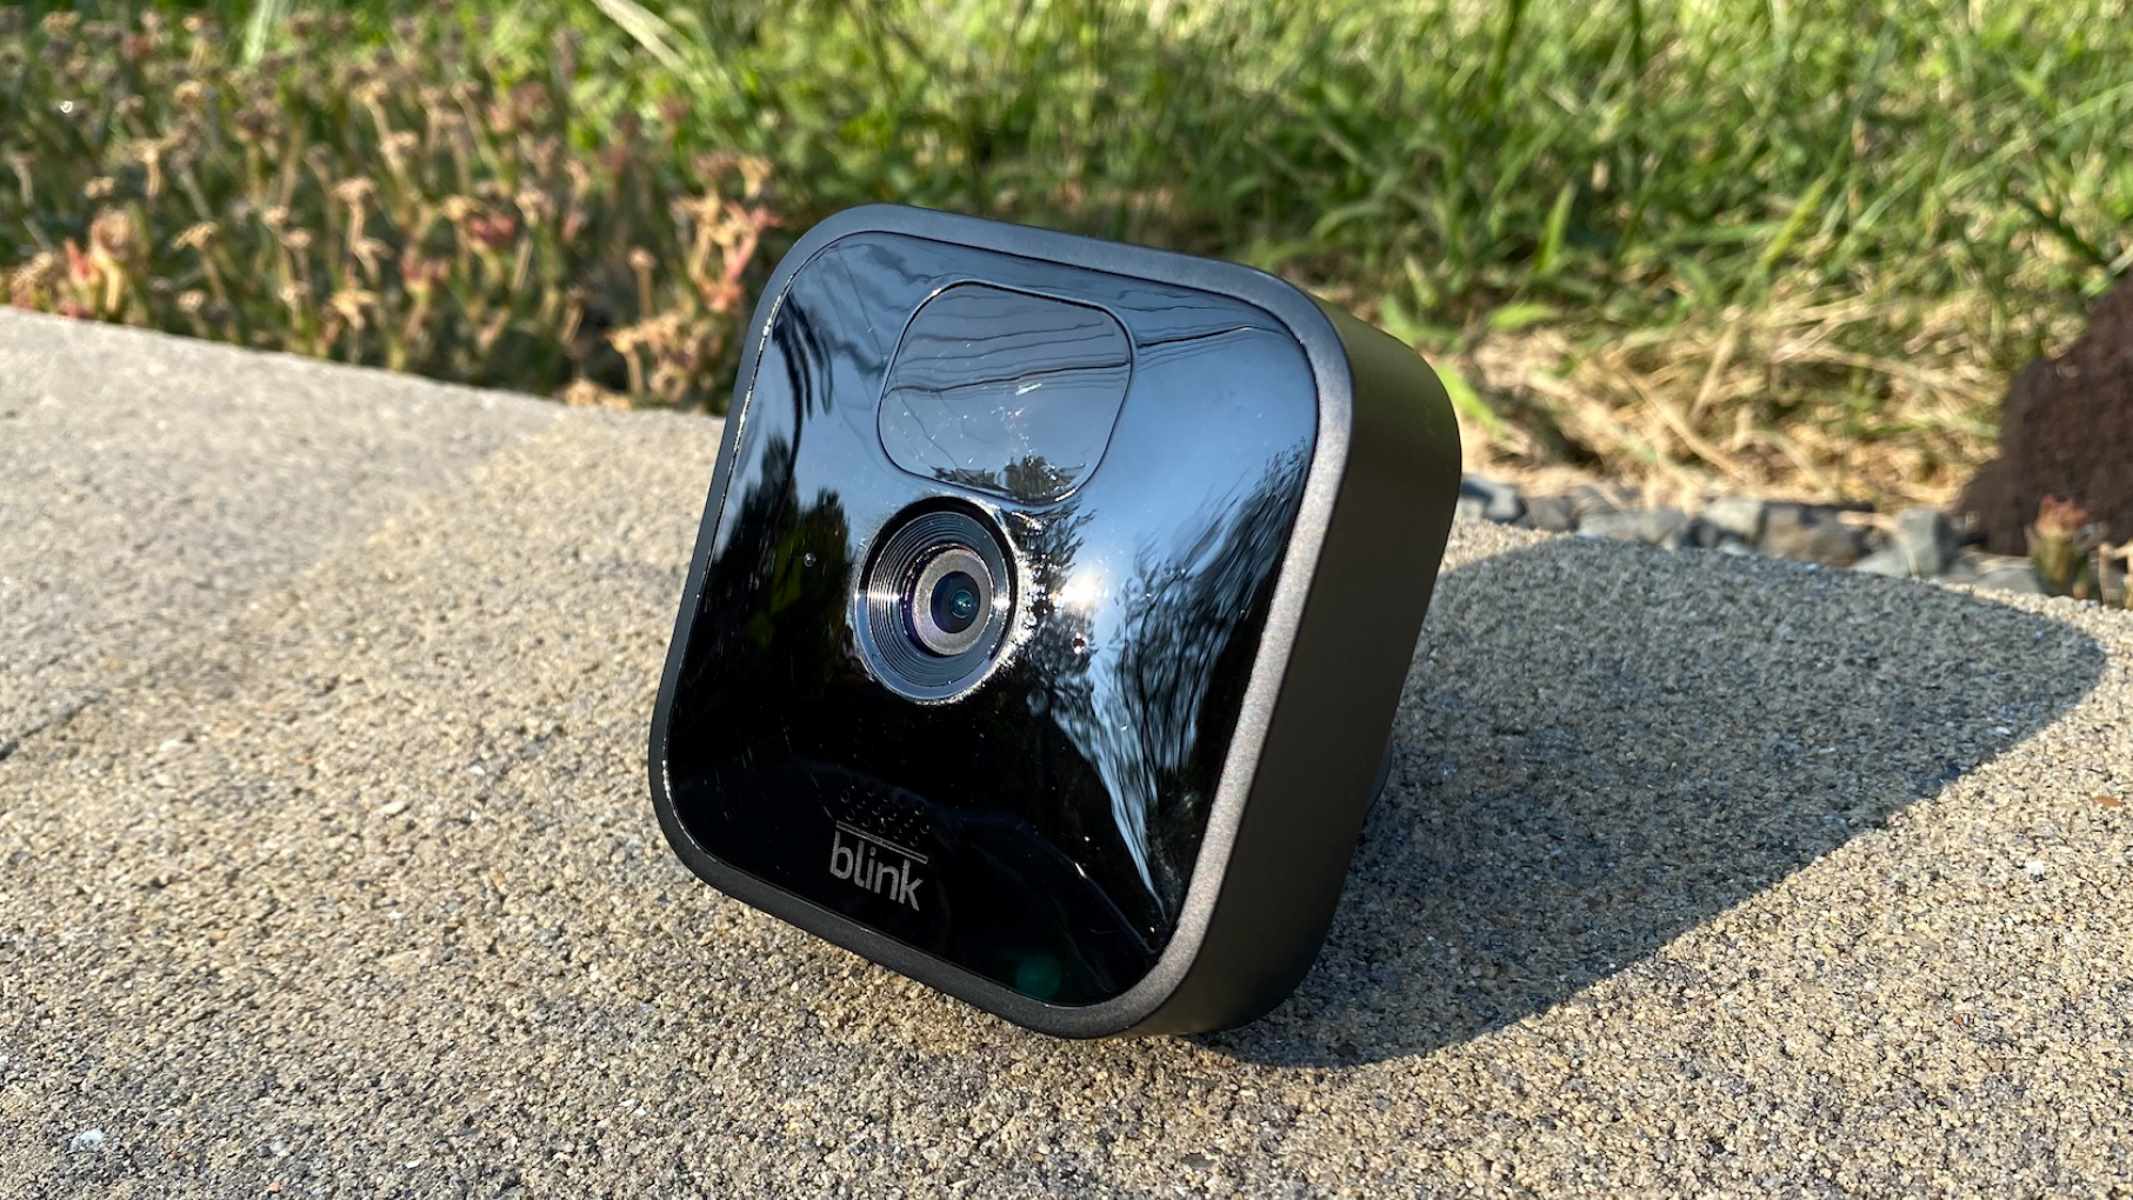 How To Mount Blink Outdoor Camera